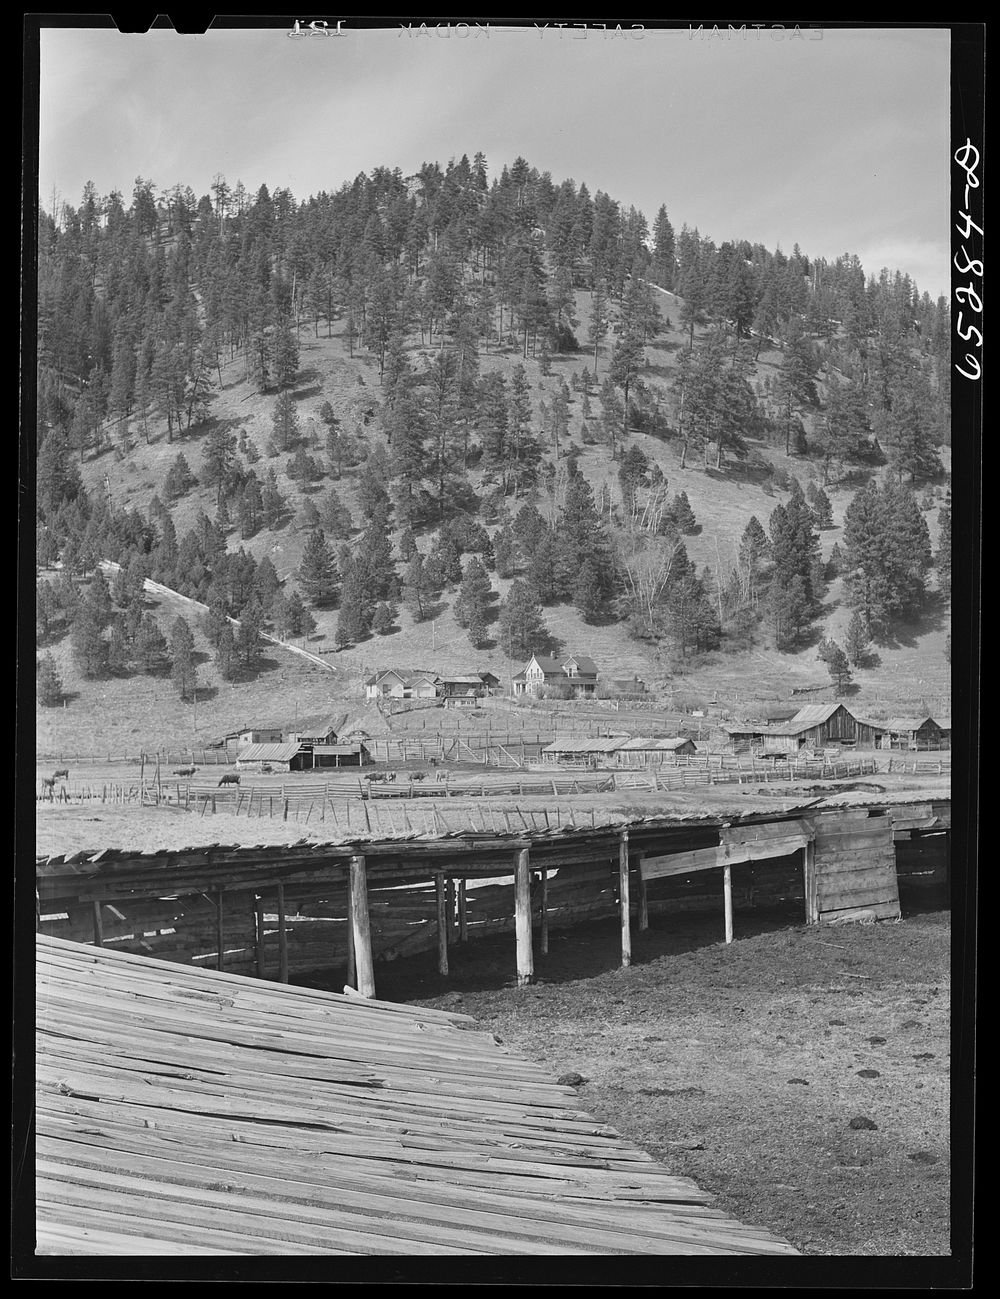 Bitterroot Valley, Ravalli County, Montana. Ranch in Ross's Hole. Sourced from the Library of Congress.